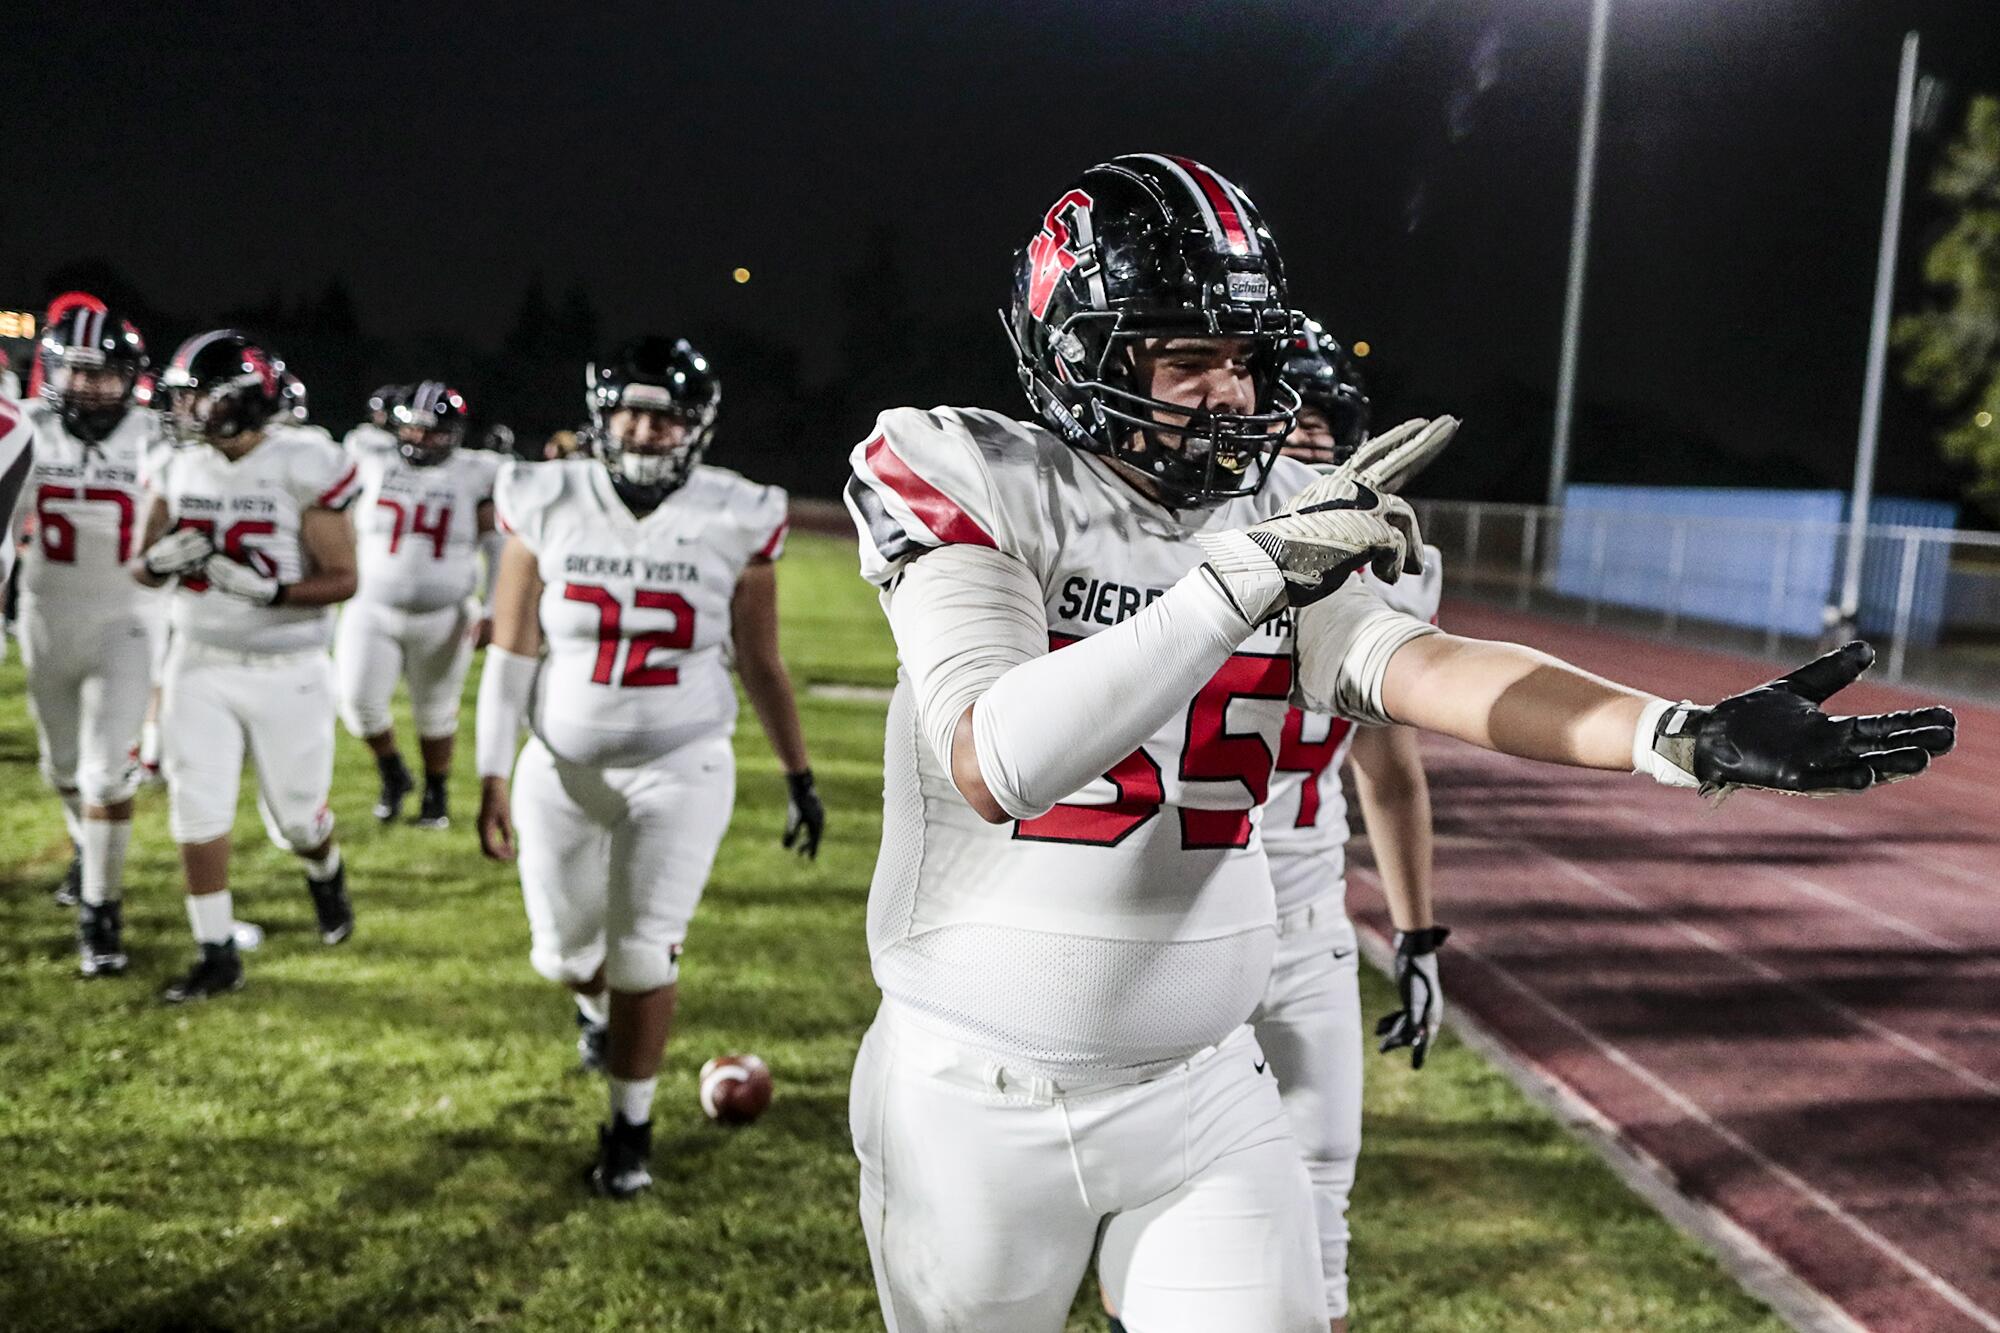 Cesar Martinez gestures in celebration after helping his team on a touchdown drive against Cerritos High.